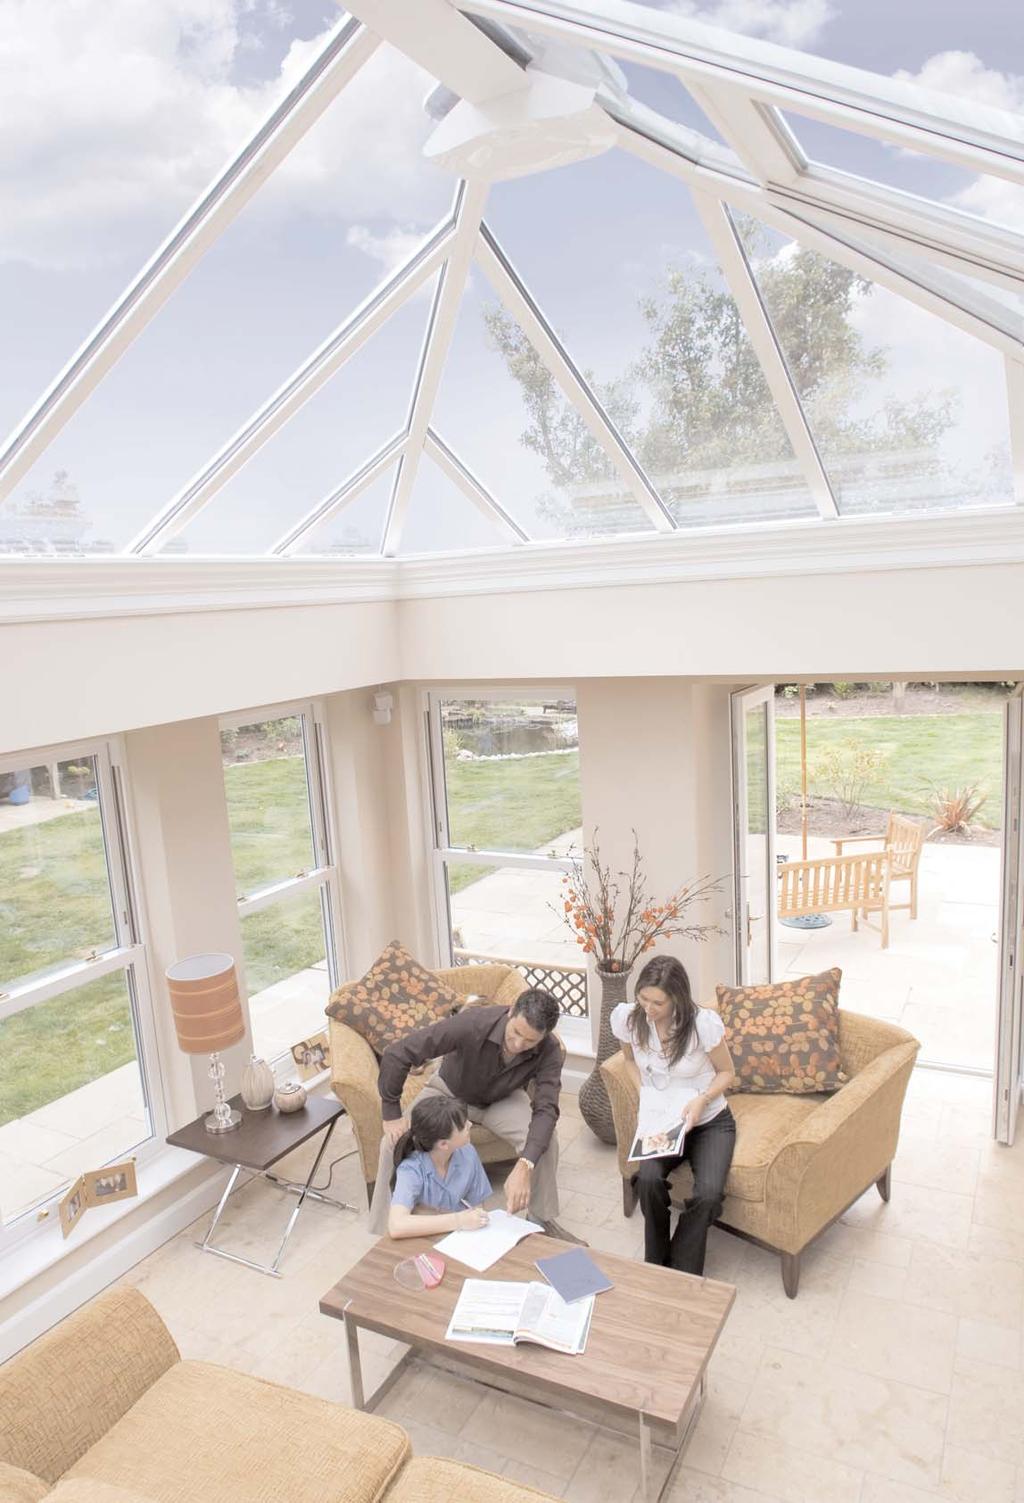 WHY CHOOSE ULTRAFRAME Ultraframe - leading the conservatory industry through innovation and expertise Here at Ultraframe, we ve been designing and manufacturing conservatory roofing systems for over